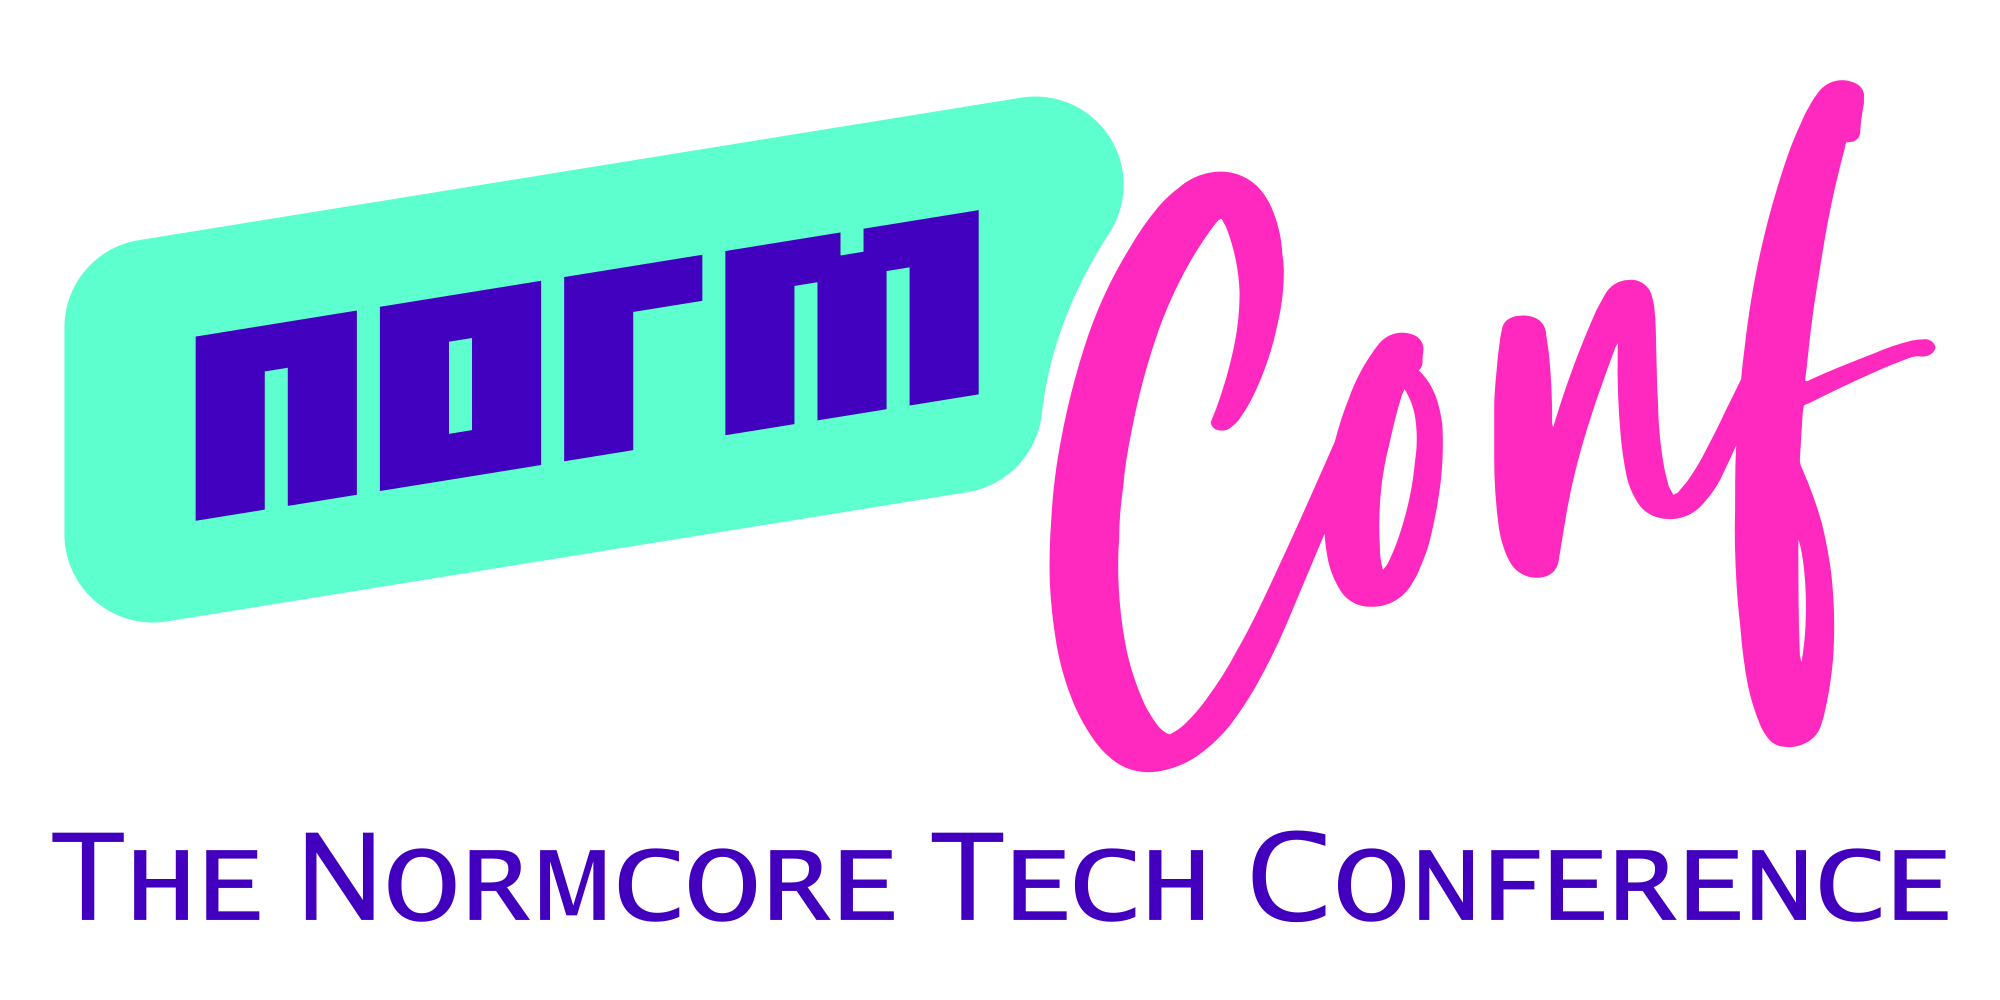 NormConf: The Normcore Tech Conference